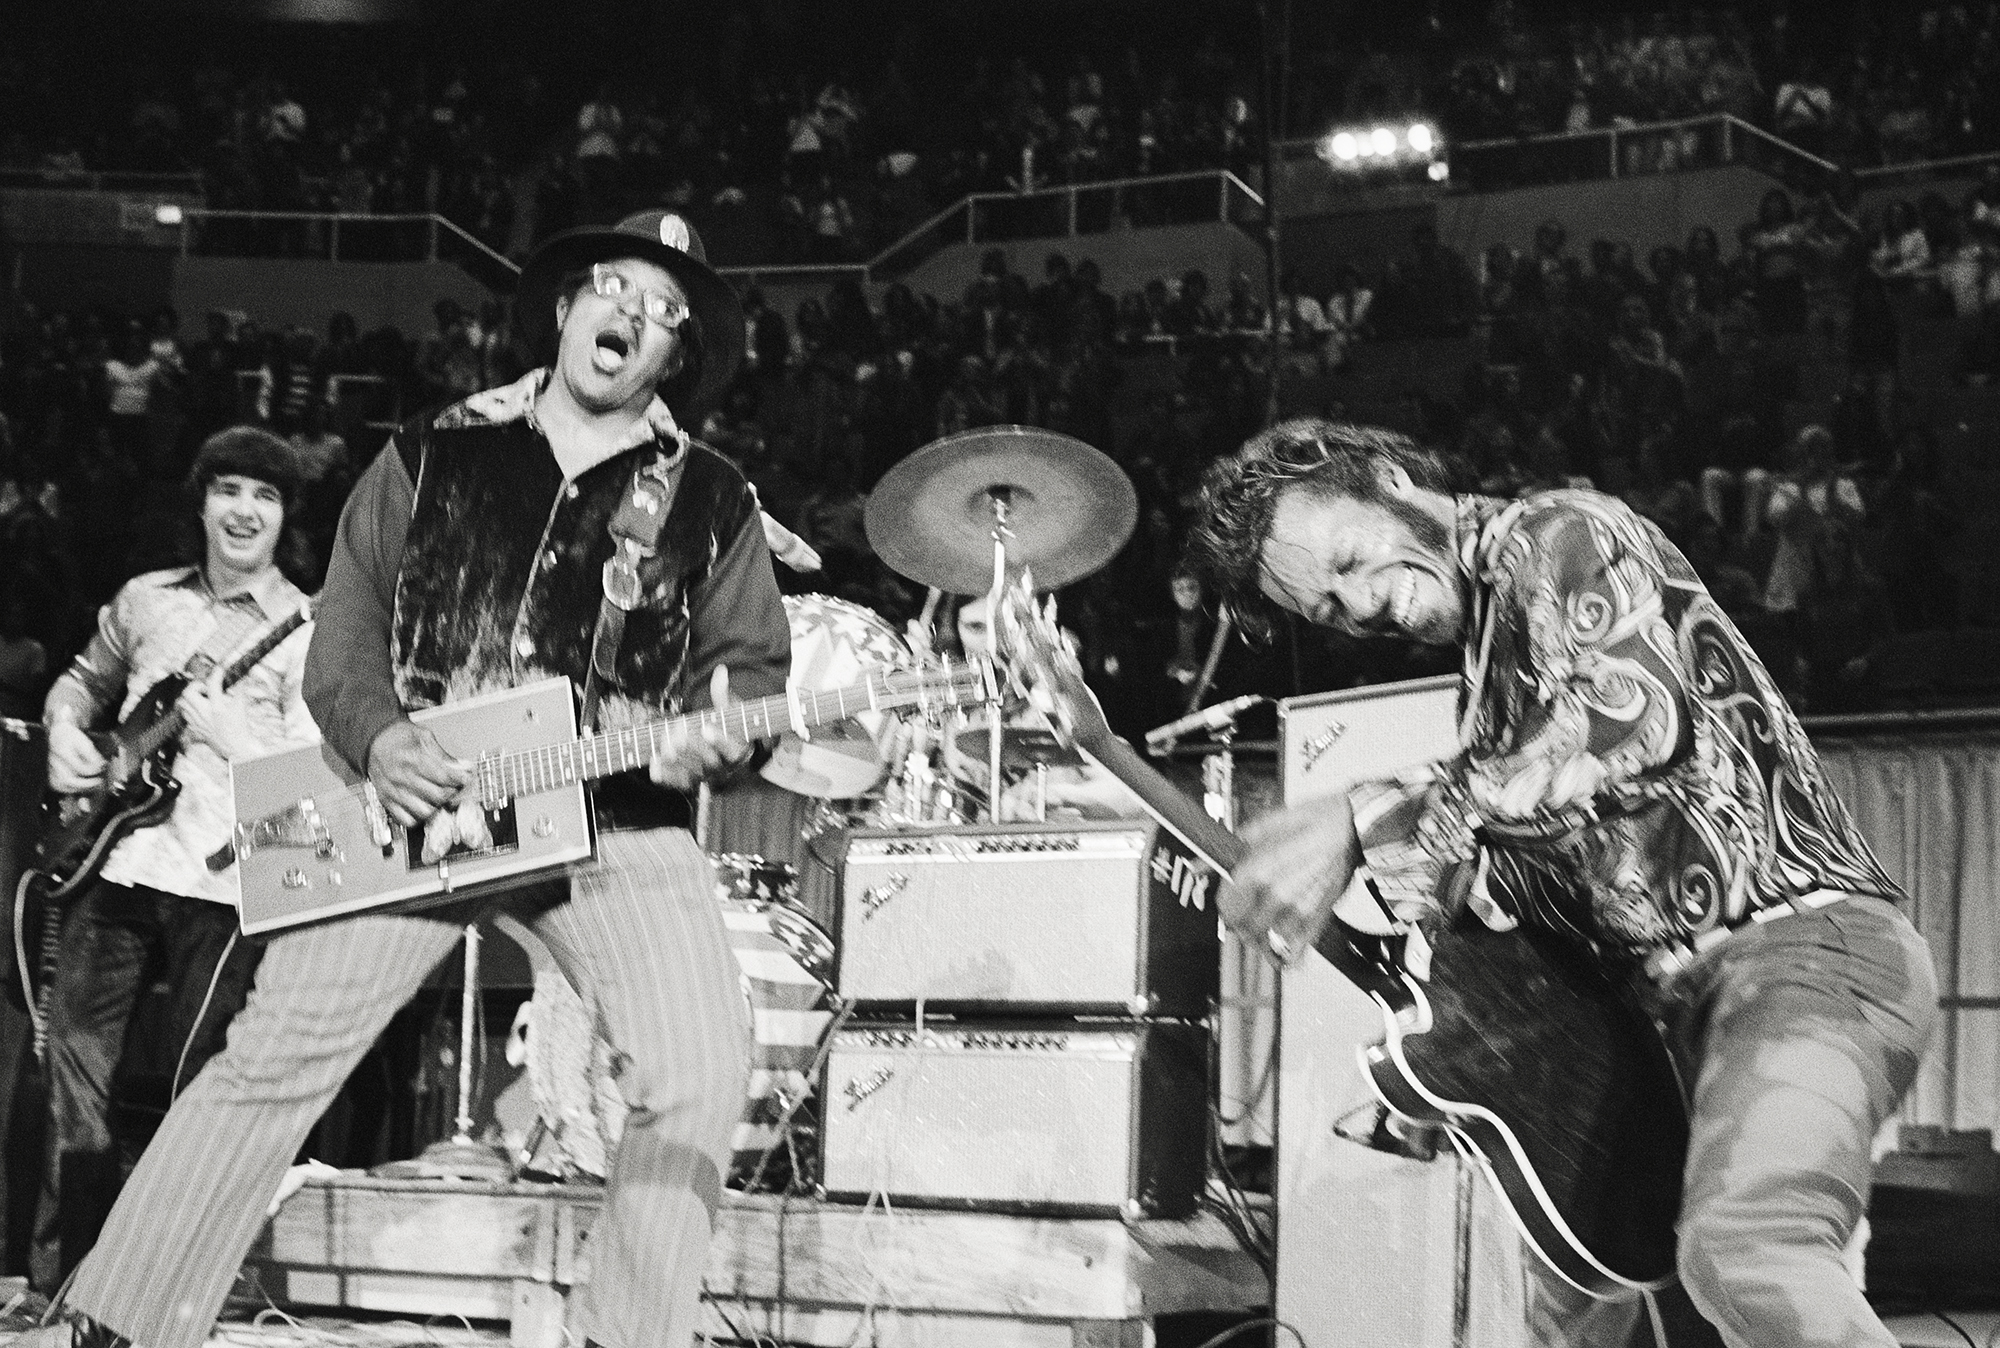 Bo Diddley and Chuck Berry perform at Madison Square Garden, on May 6, 1972 in New York City.